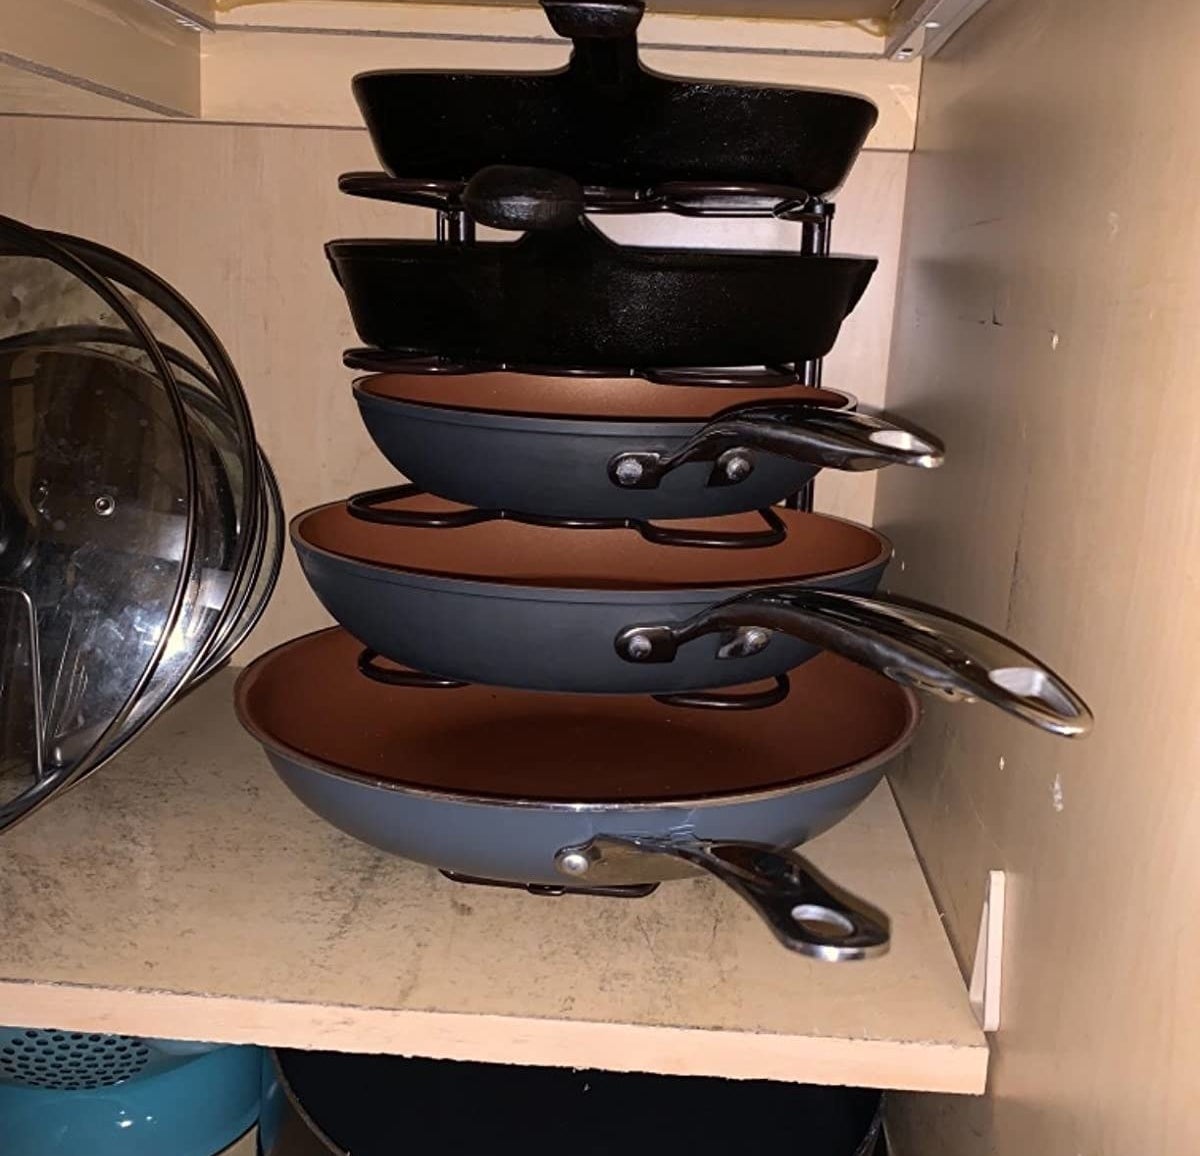 reviewer photo showing their pots and pans neatly stacked on the organizer